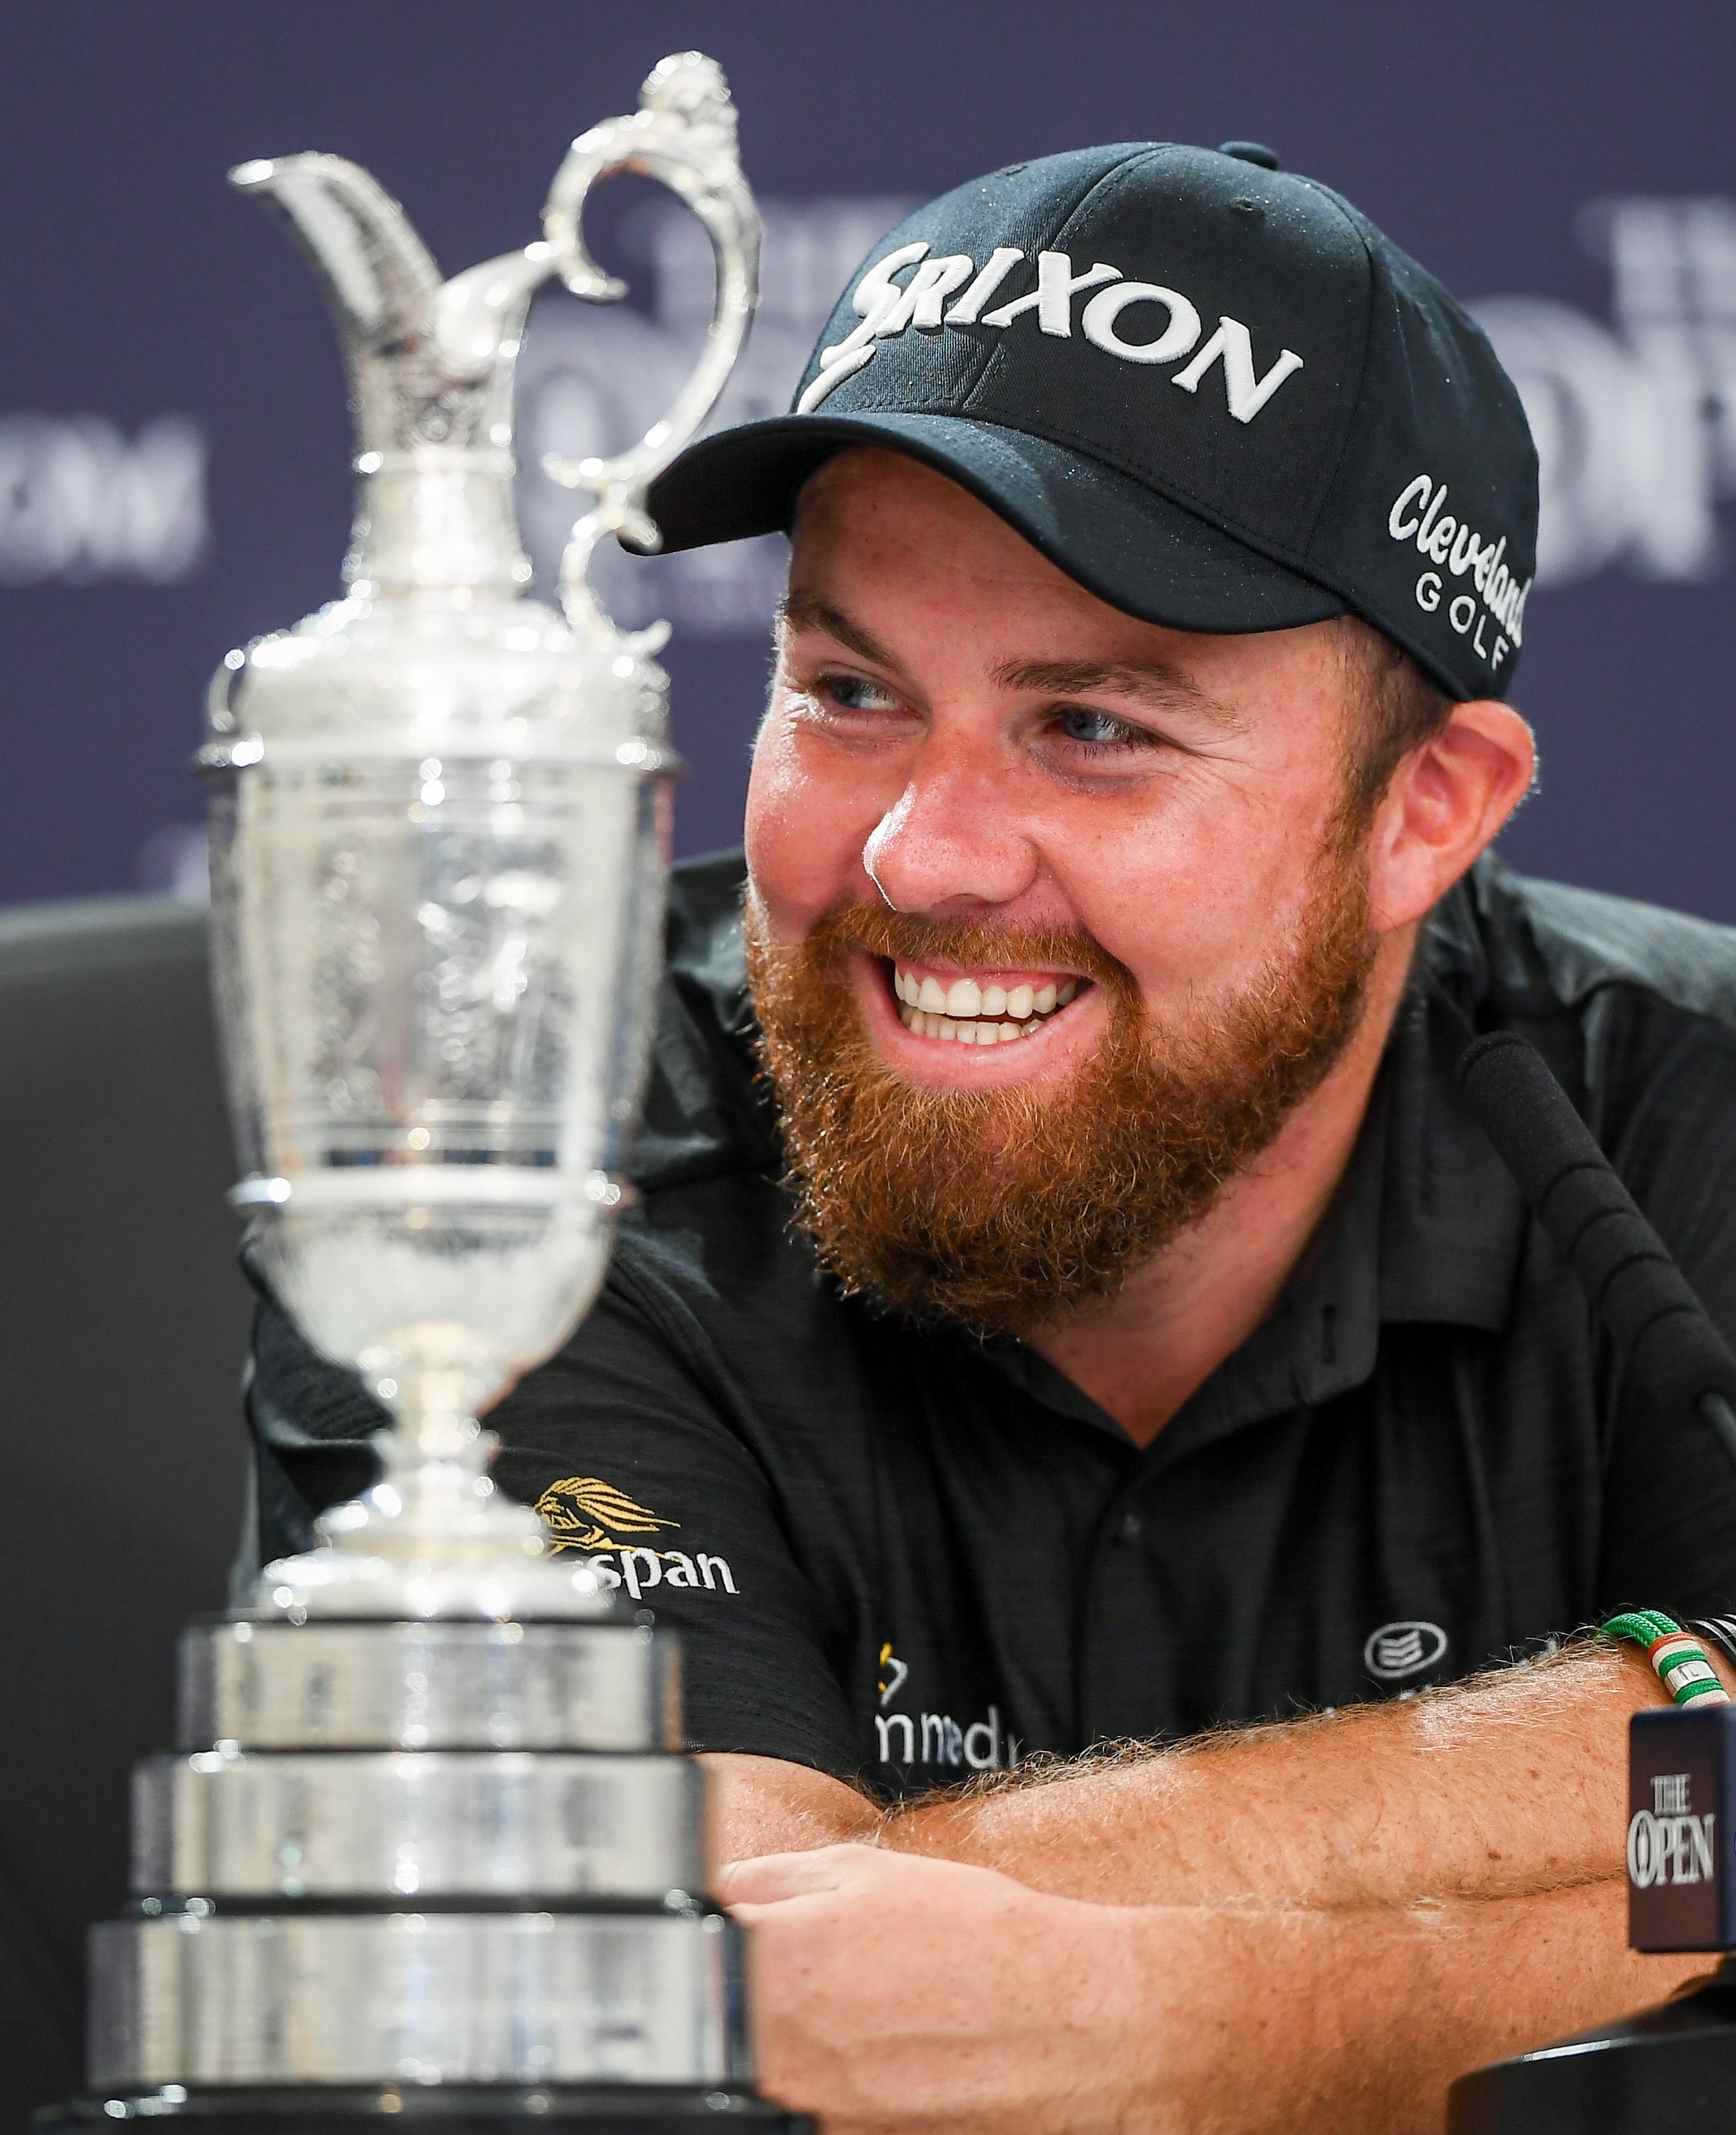 Offaly renames Open trophy the 'Clara' jug as Shane Lowry's local club shows off his record scorecard